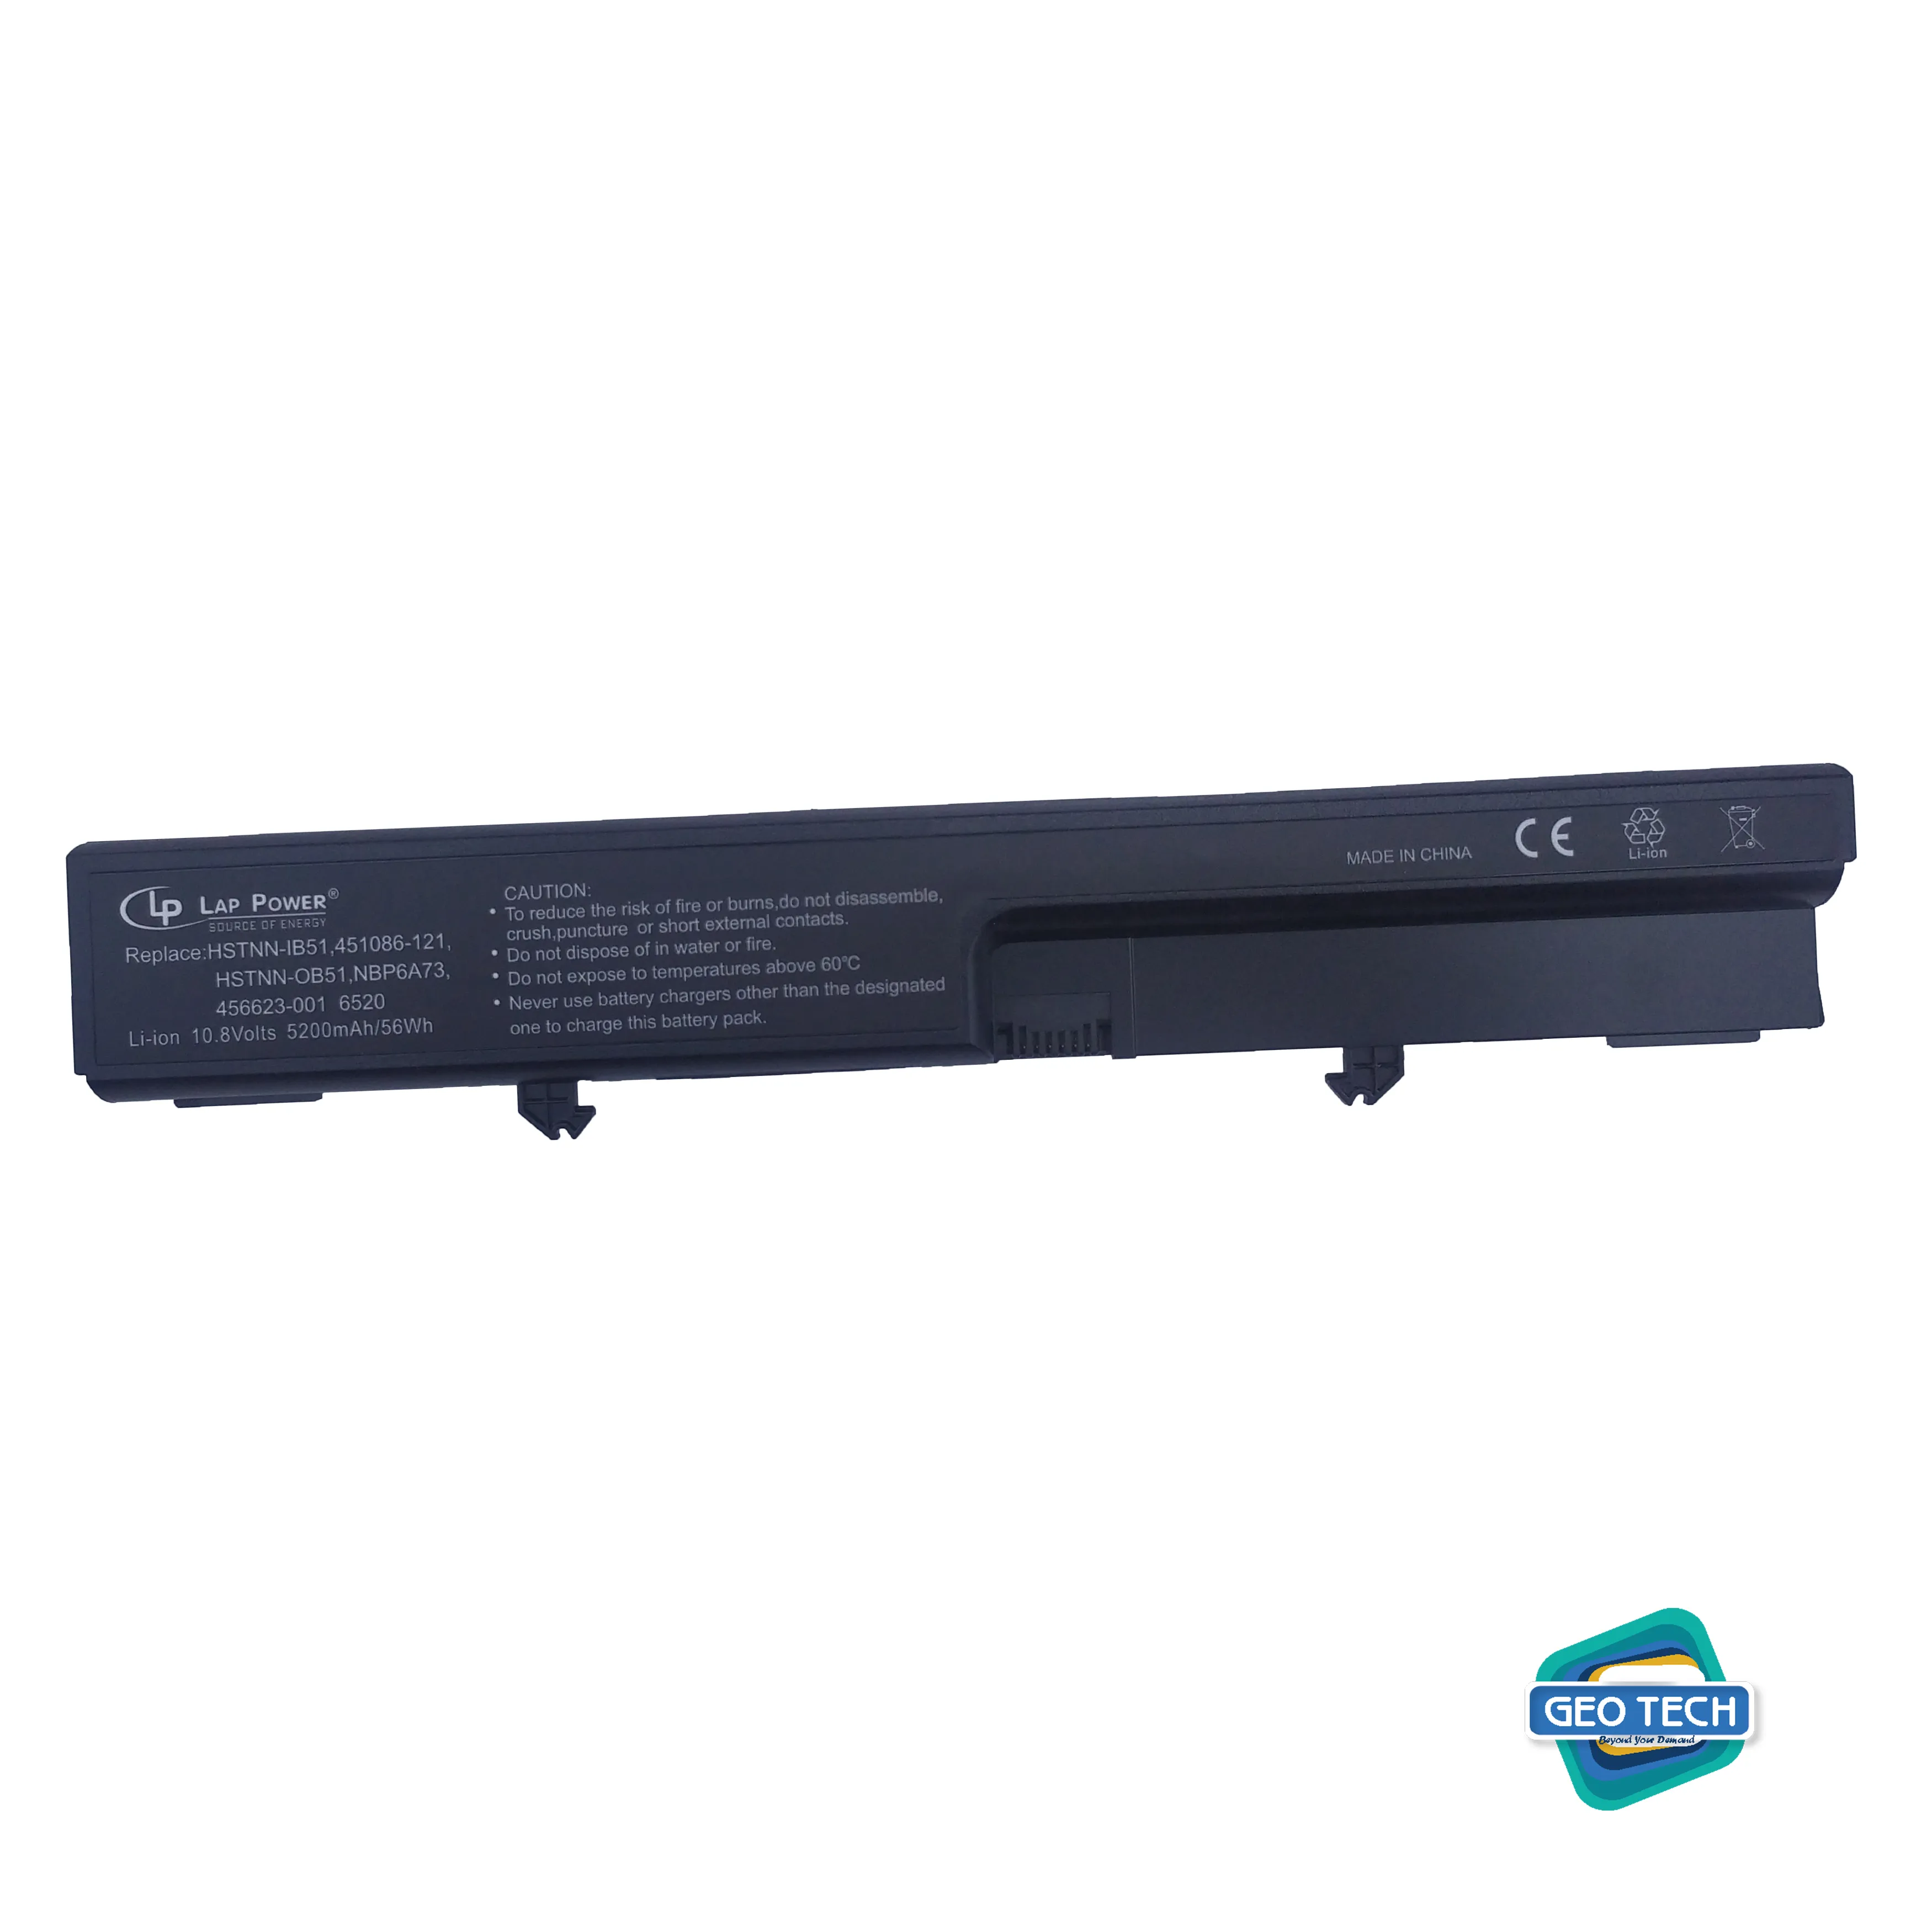 Hp 6520 Compaq 6 Cell Laptop Battery